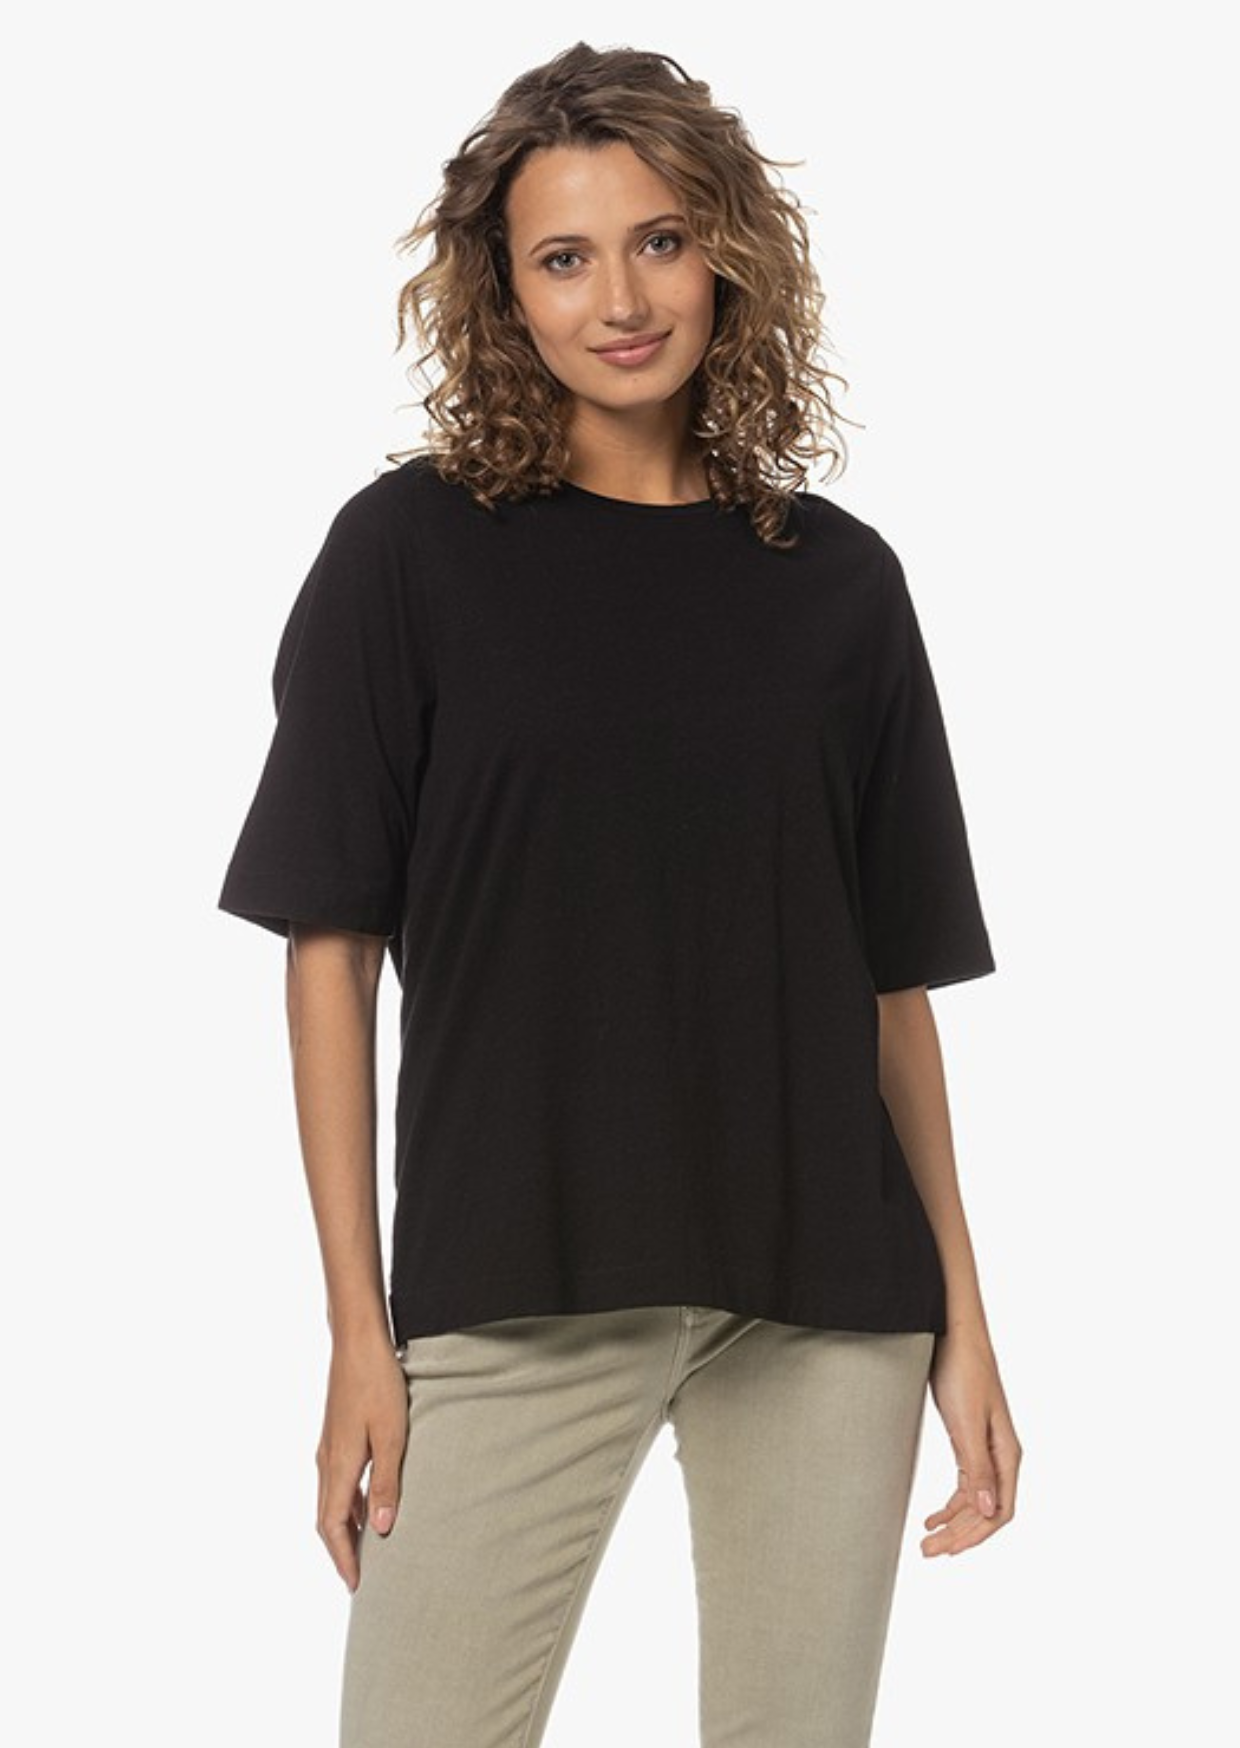 Closed T-shirt wide sleeve black 